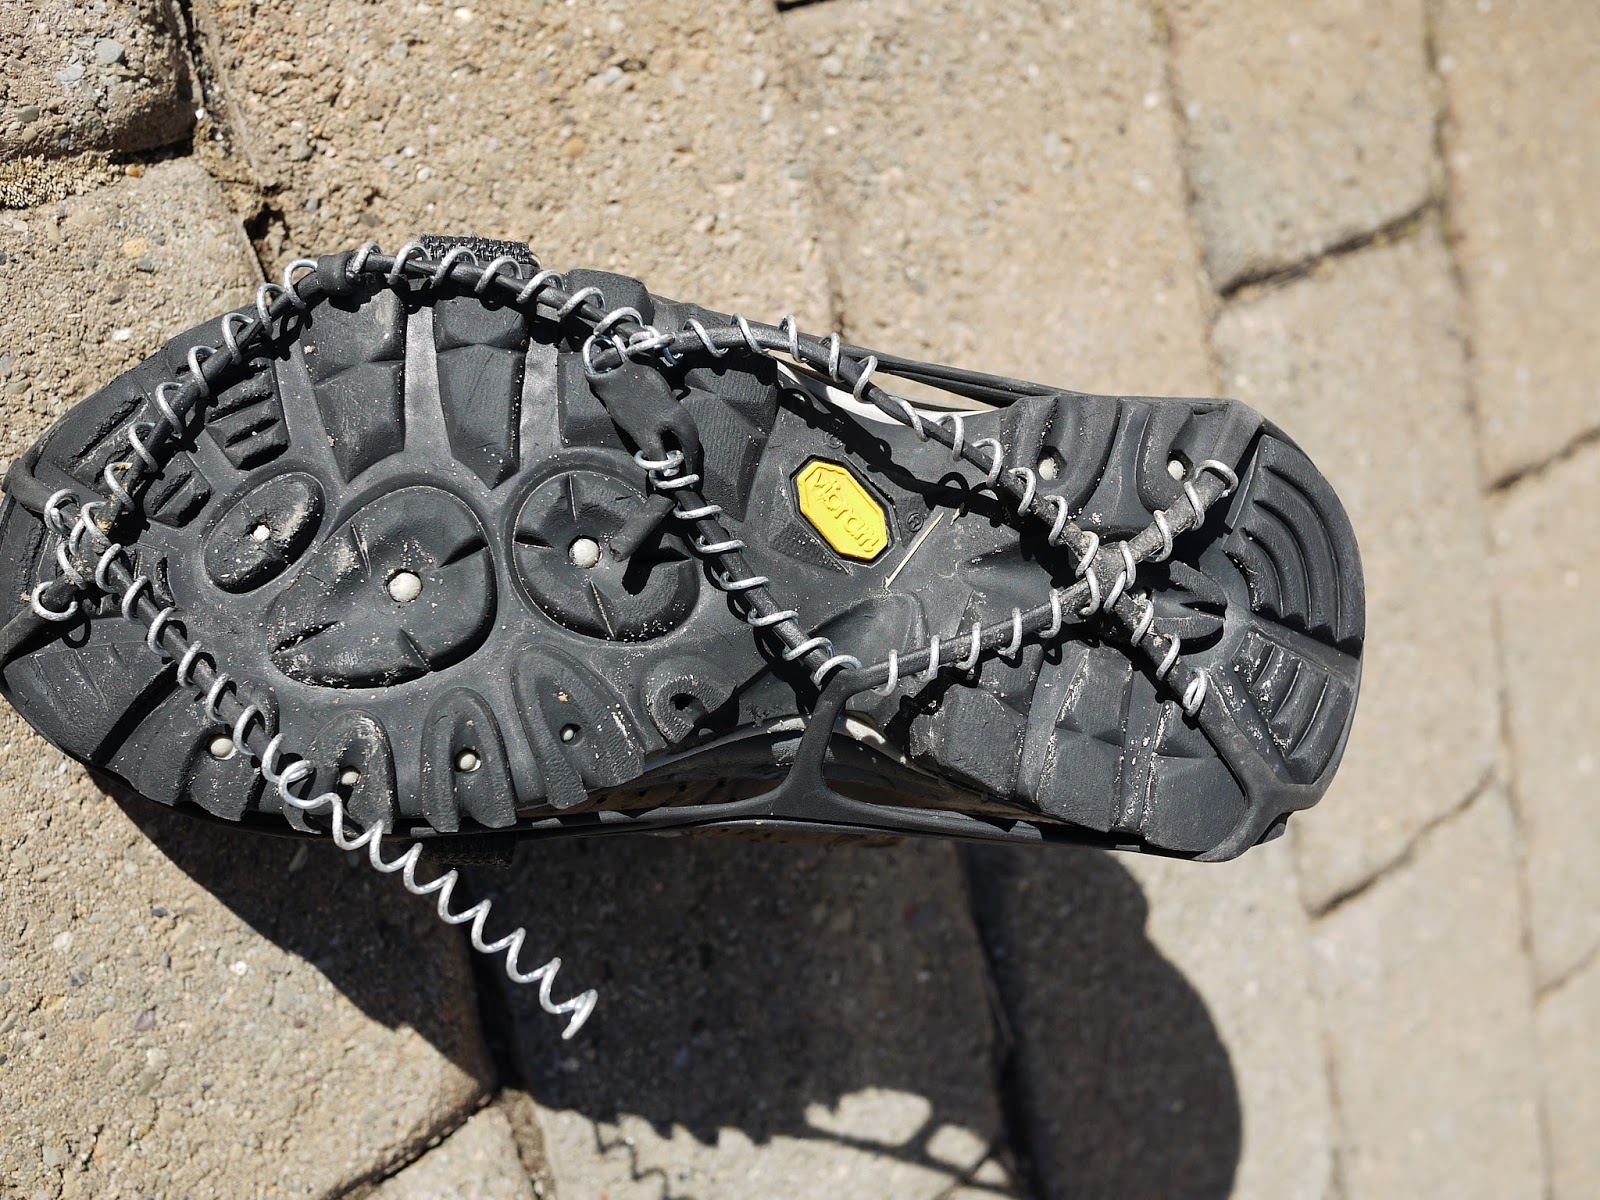 Yaktrax vs. Microspikes, Microspikes gear review, Yaktrax gear review